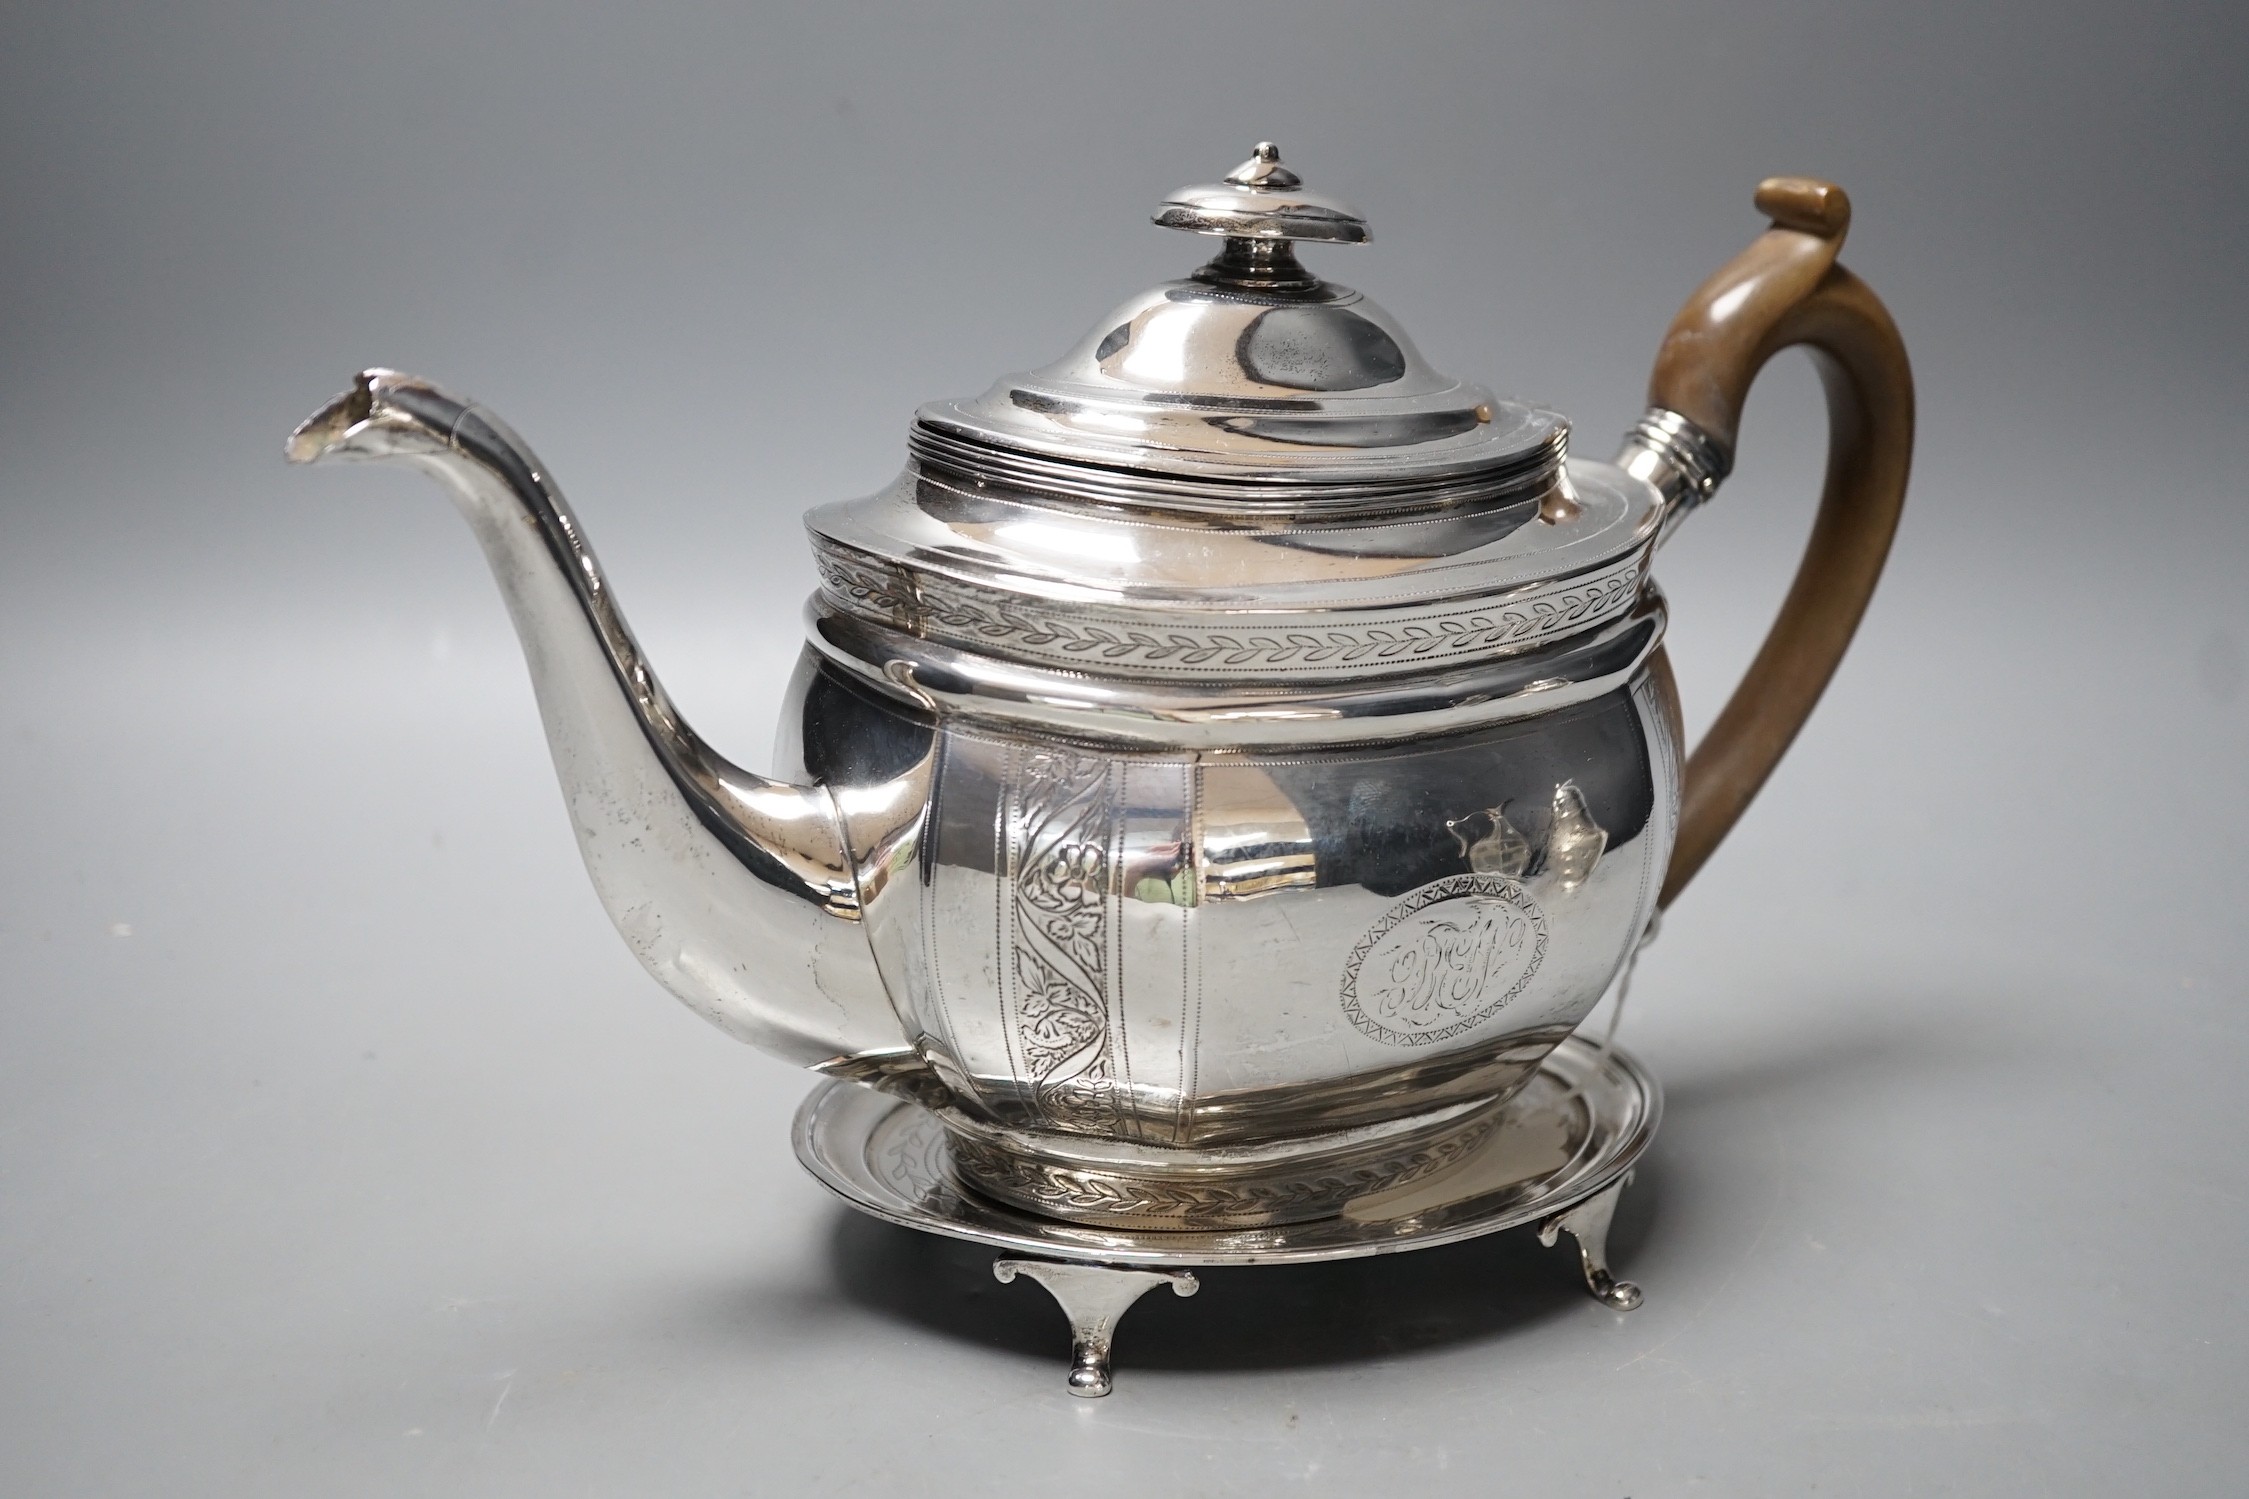 A George III engraved silver oval teapot, Alice & George Burroughs?, London, 1804 and an associated oval silver stand, James Darquits, London, 1805, gross weight 18.3oz.